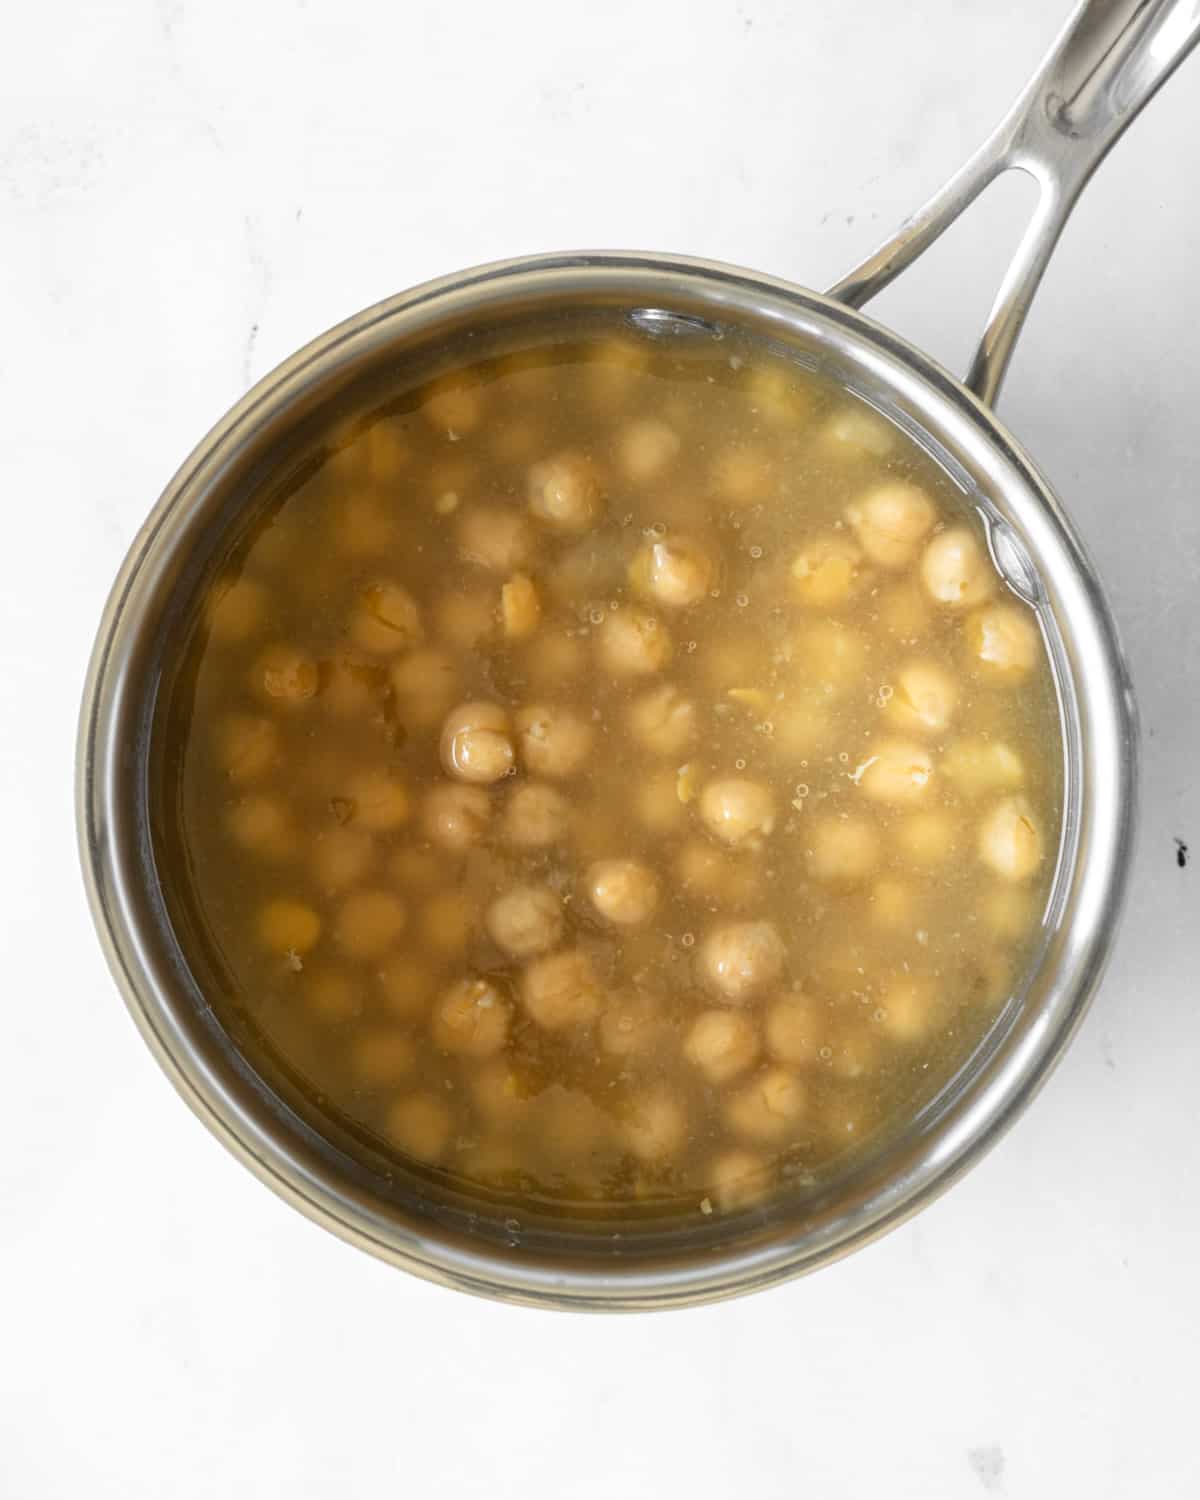 chickpeas and aquafaba in a saucepan.